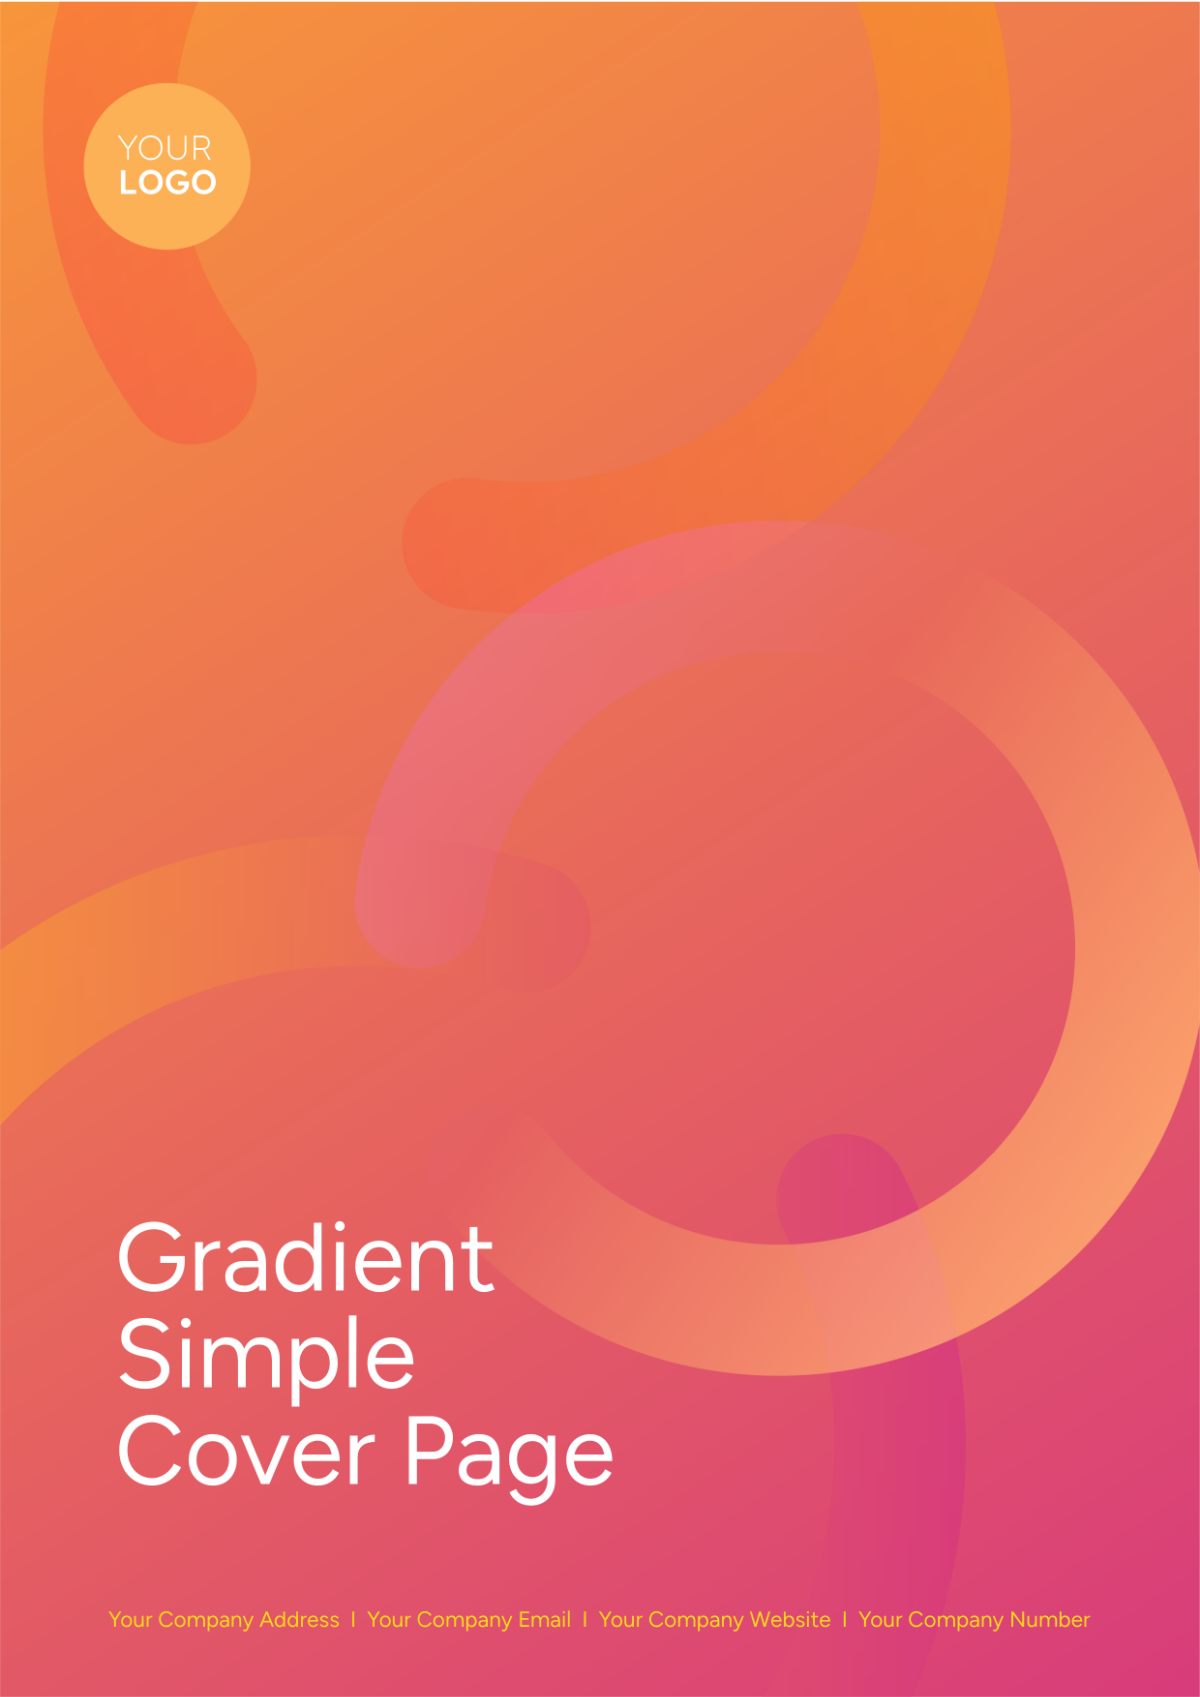 Gradient Simple Cover Page